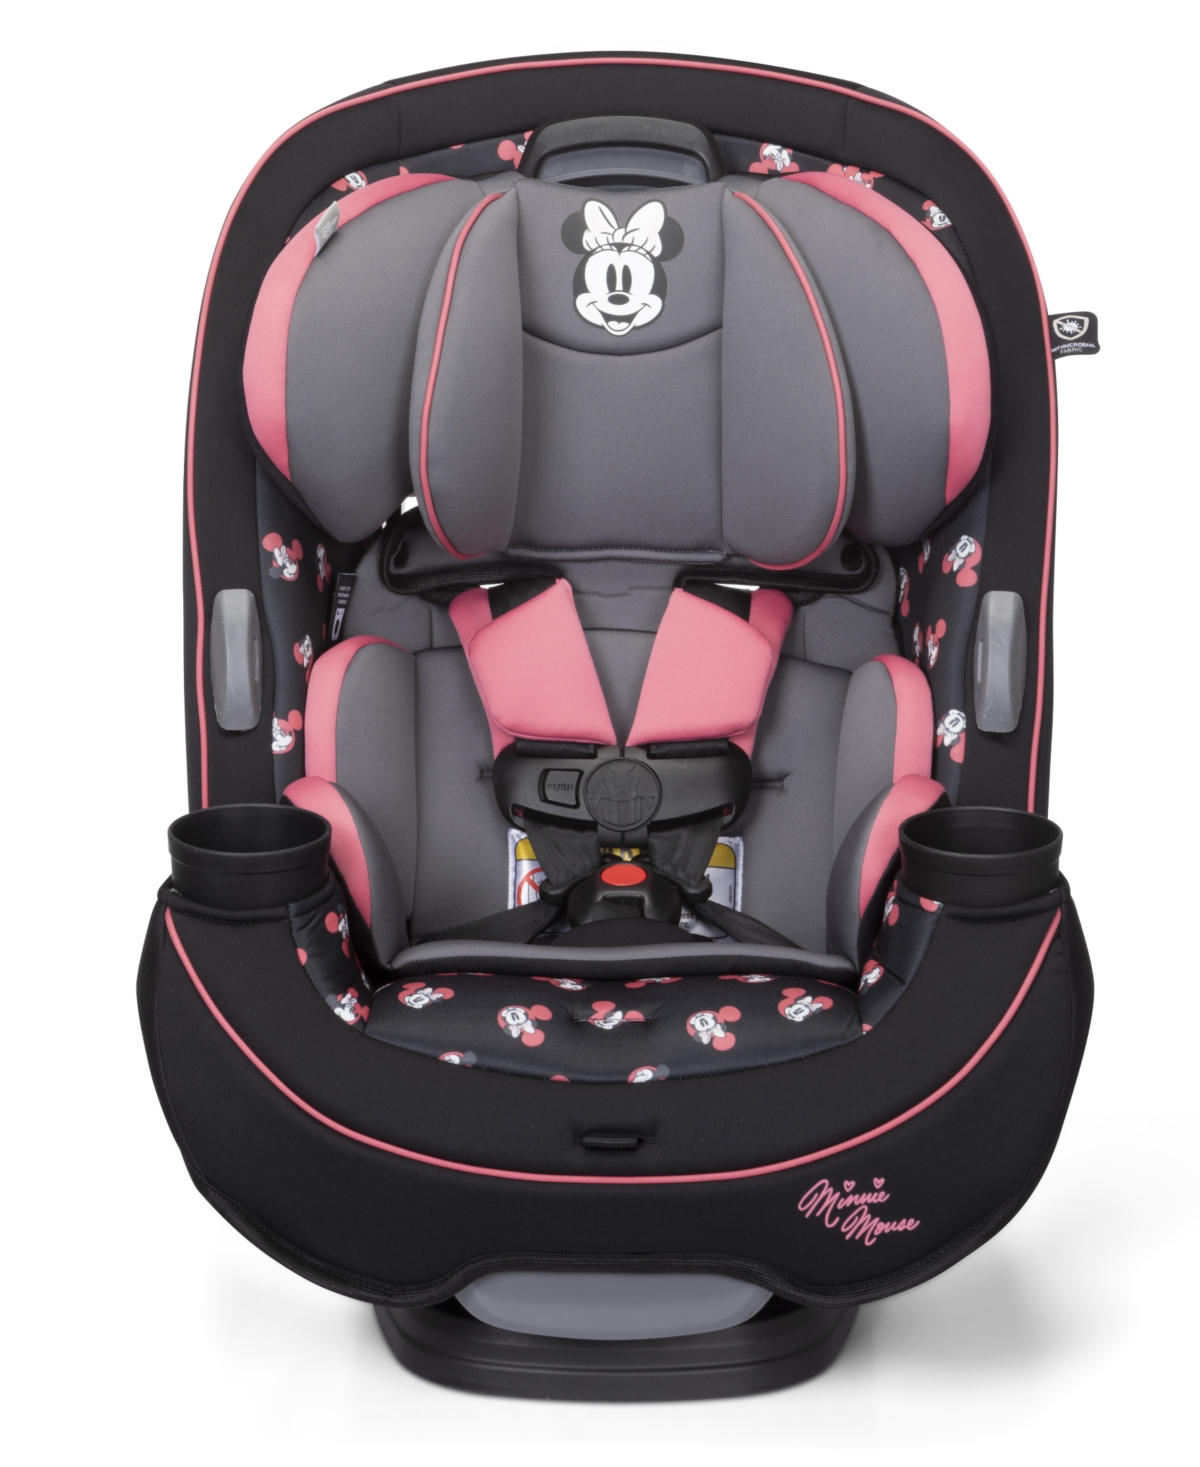 Disney Baby Grow And Go All In One Convertible Car Seat In Pink